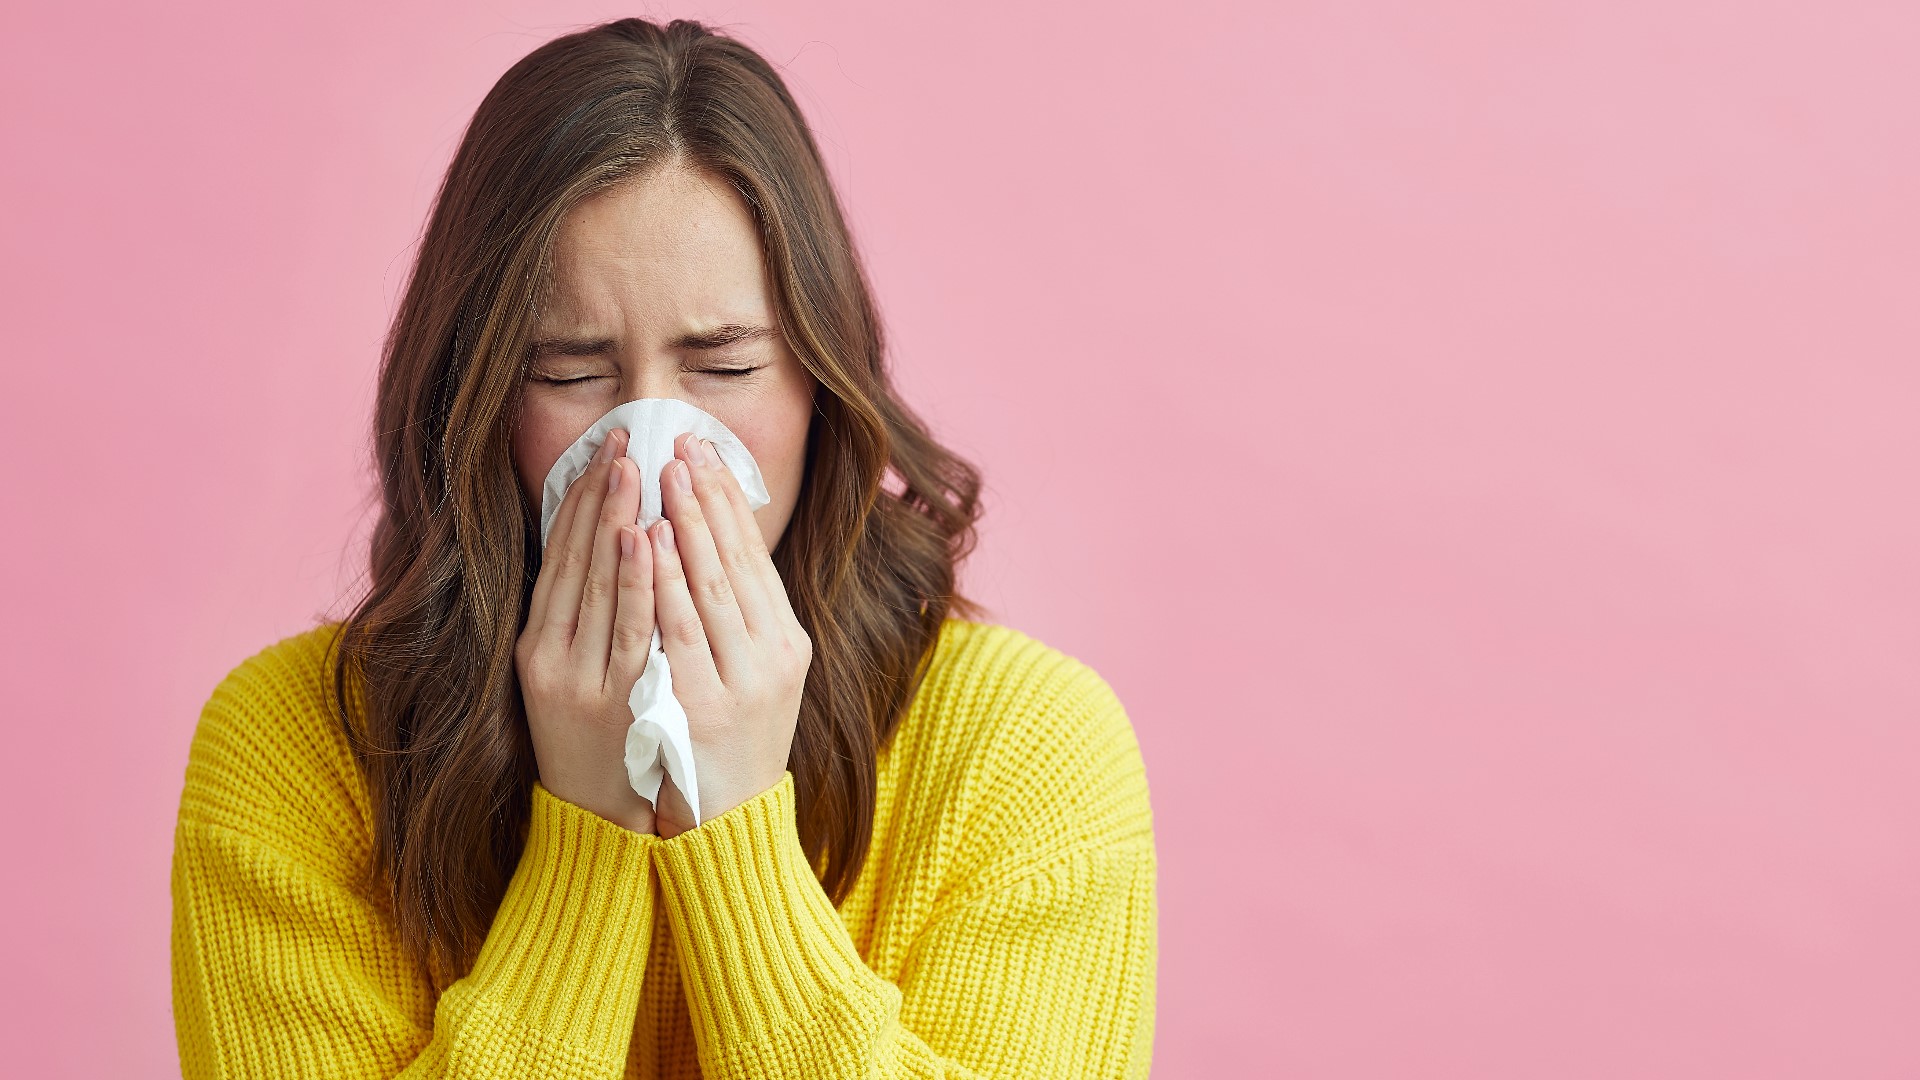 North Carolina and South Carolina were among the top five states where people are searching the term “allergies” on Google.